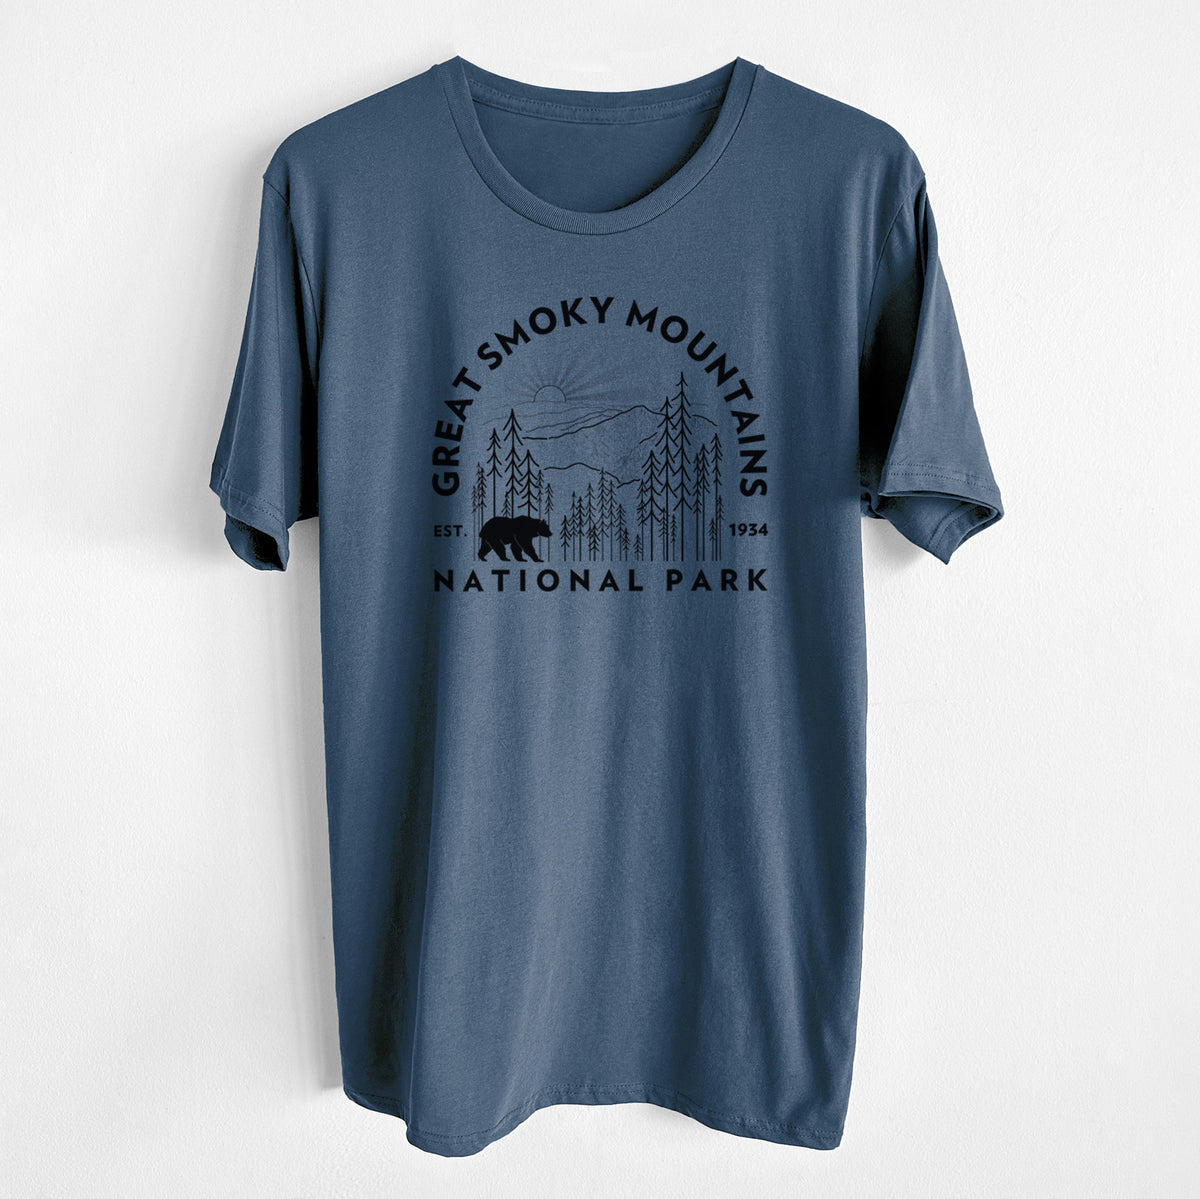 Great Smoky Mountains National Park - Unisex Crewneck - Made in USA - 100% Organic Cotton